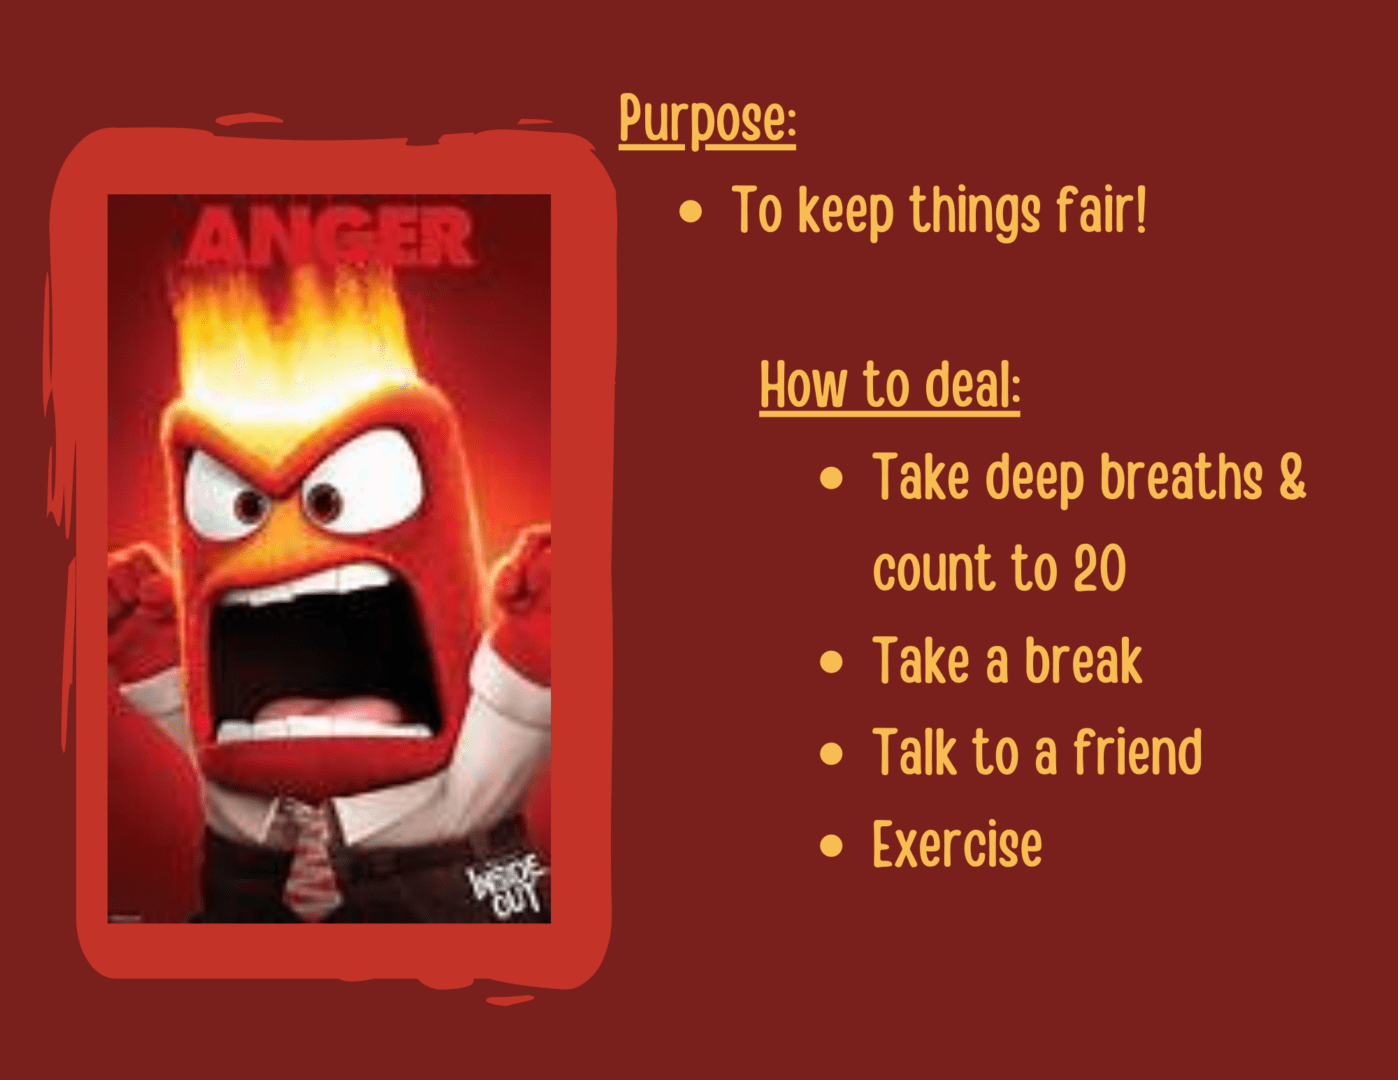 An illustration of anger cartoon character